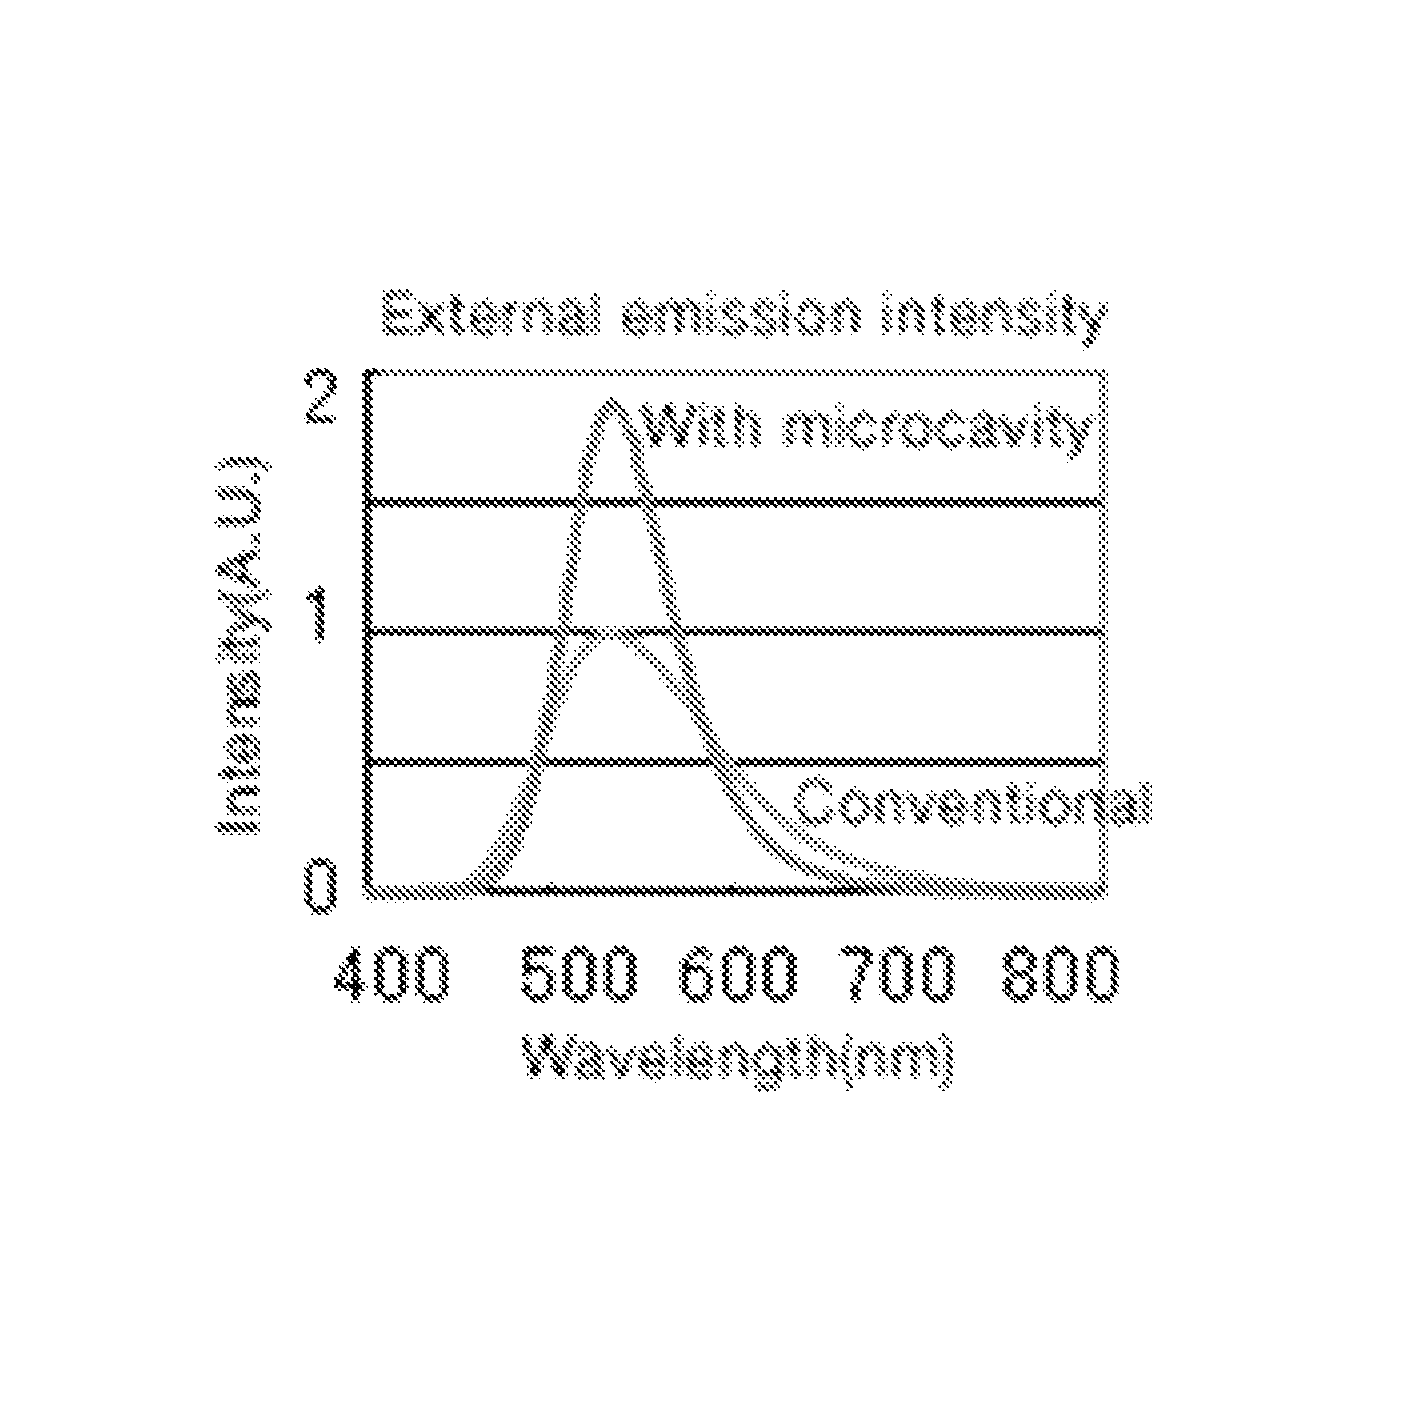 Organic light emitting display having improved color shift and visibility